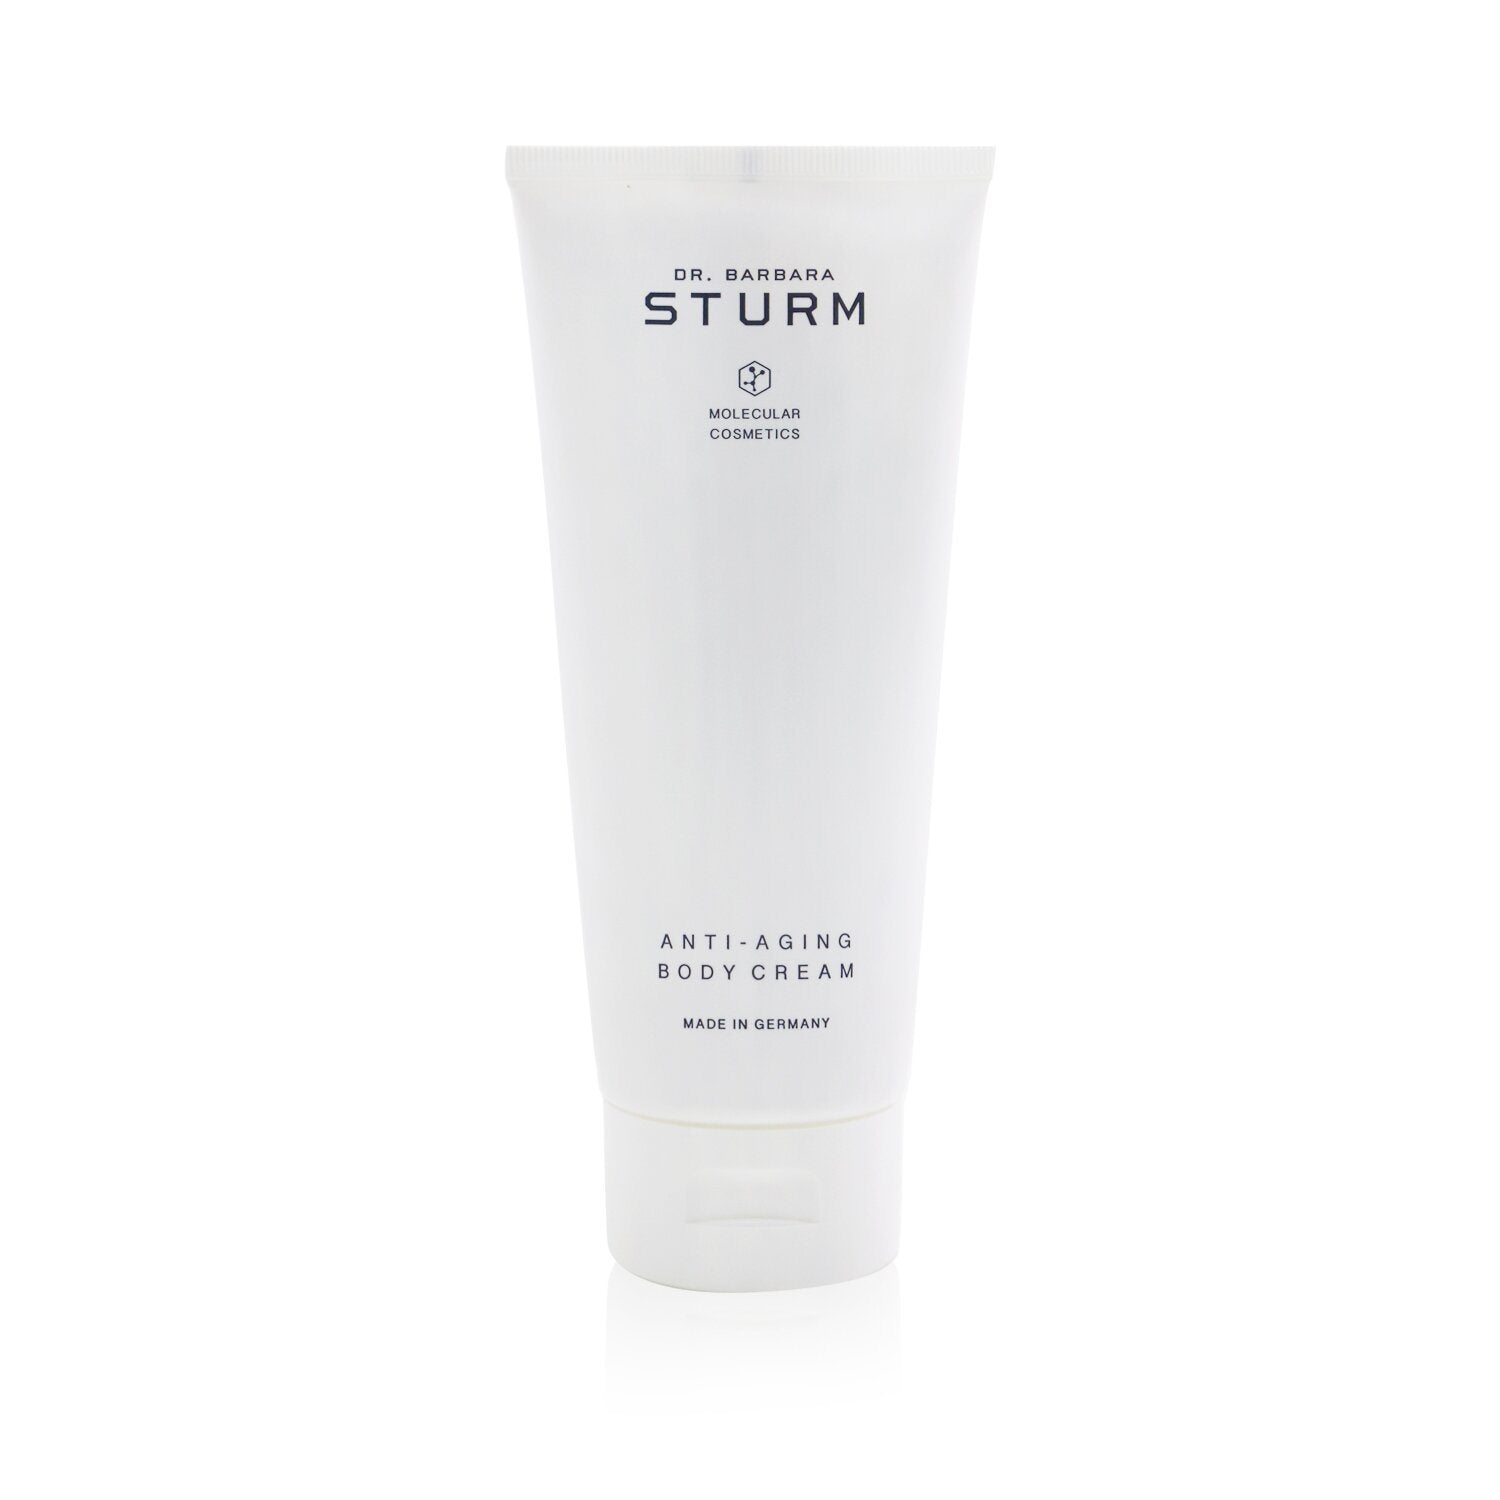 A tube of DR. BARBARA STURM - Anti-Aging Body Cream 32790/402070 200ml/6.76oz for visible signs of aging on a white background.